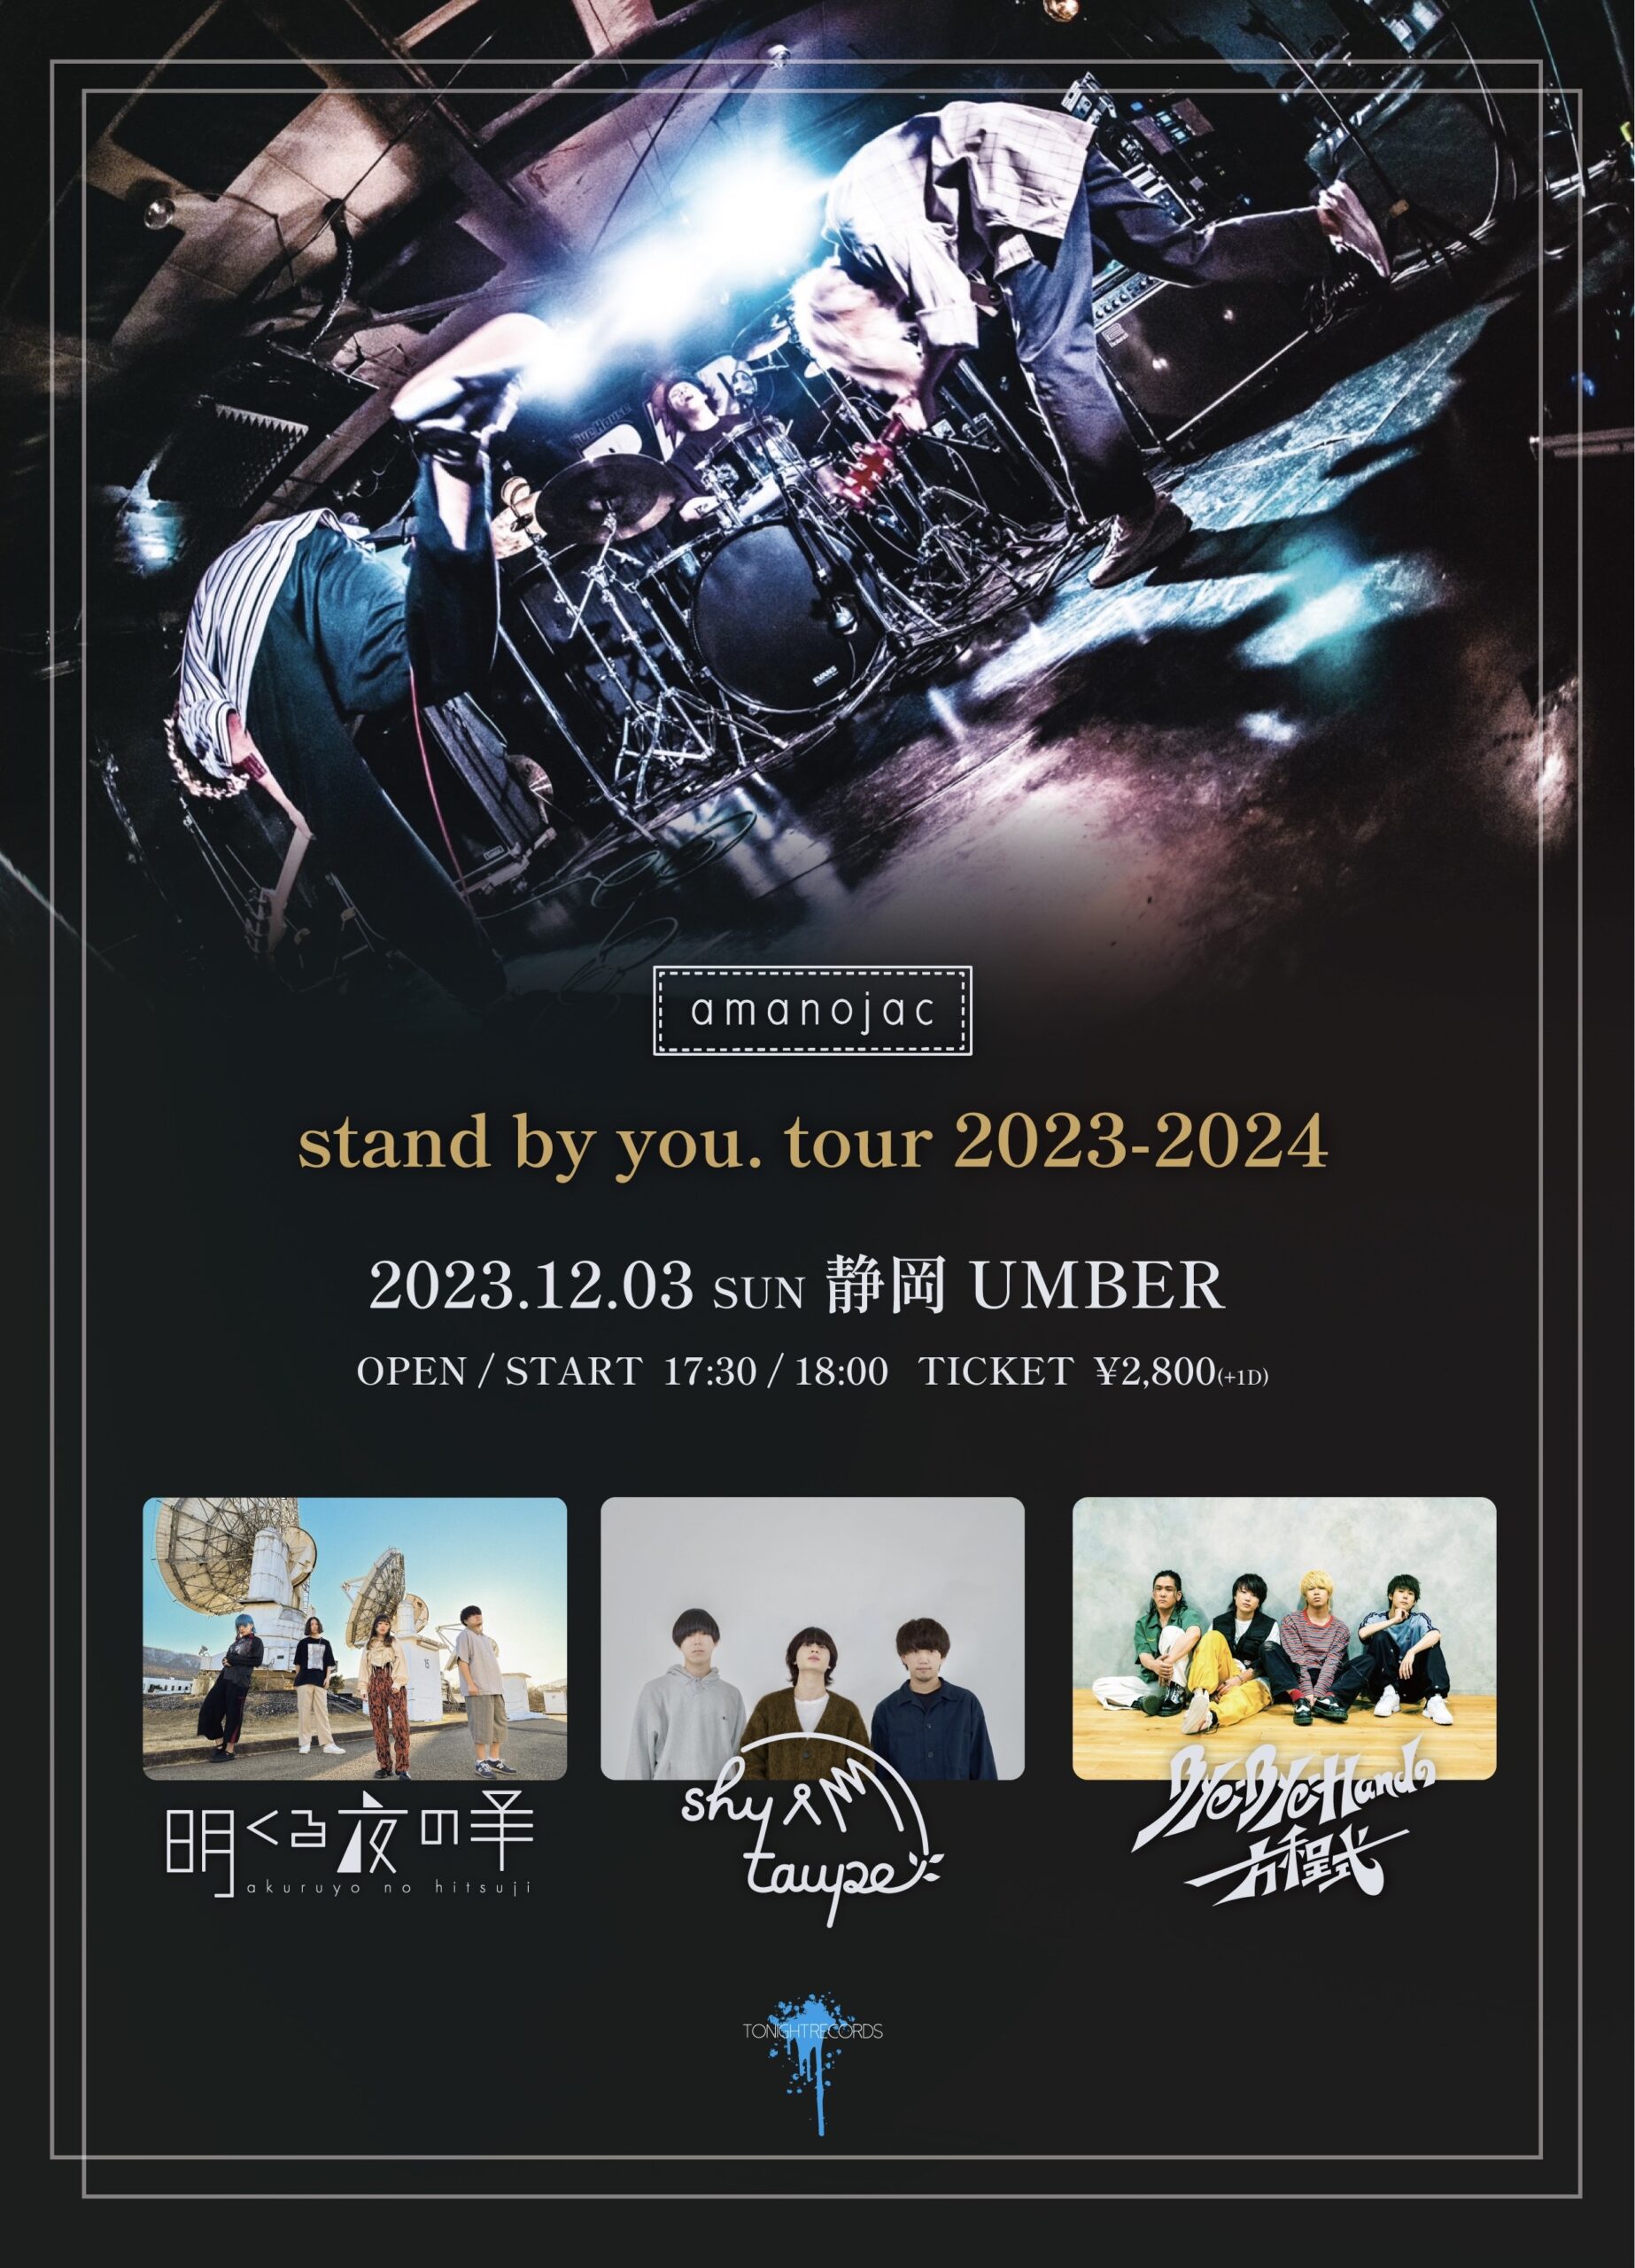 amanojac stand by you. Tour 2023-2024